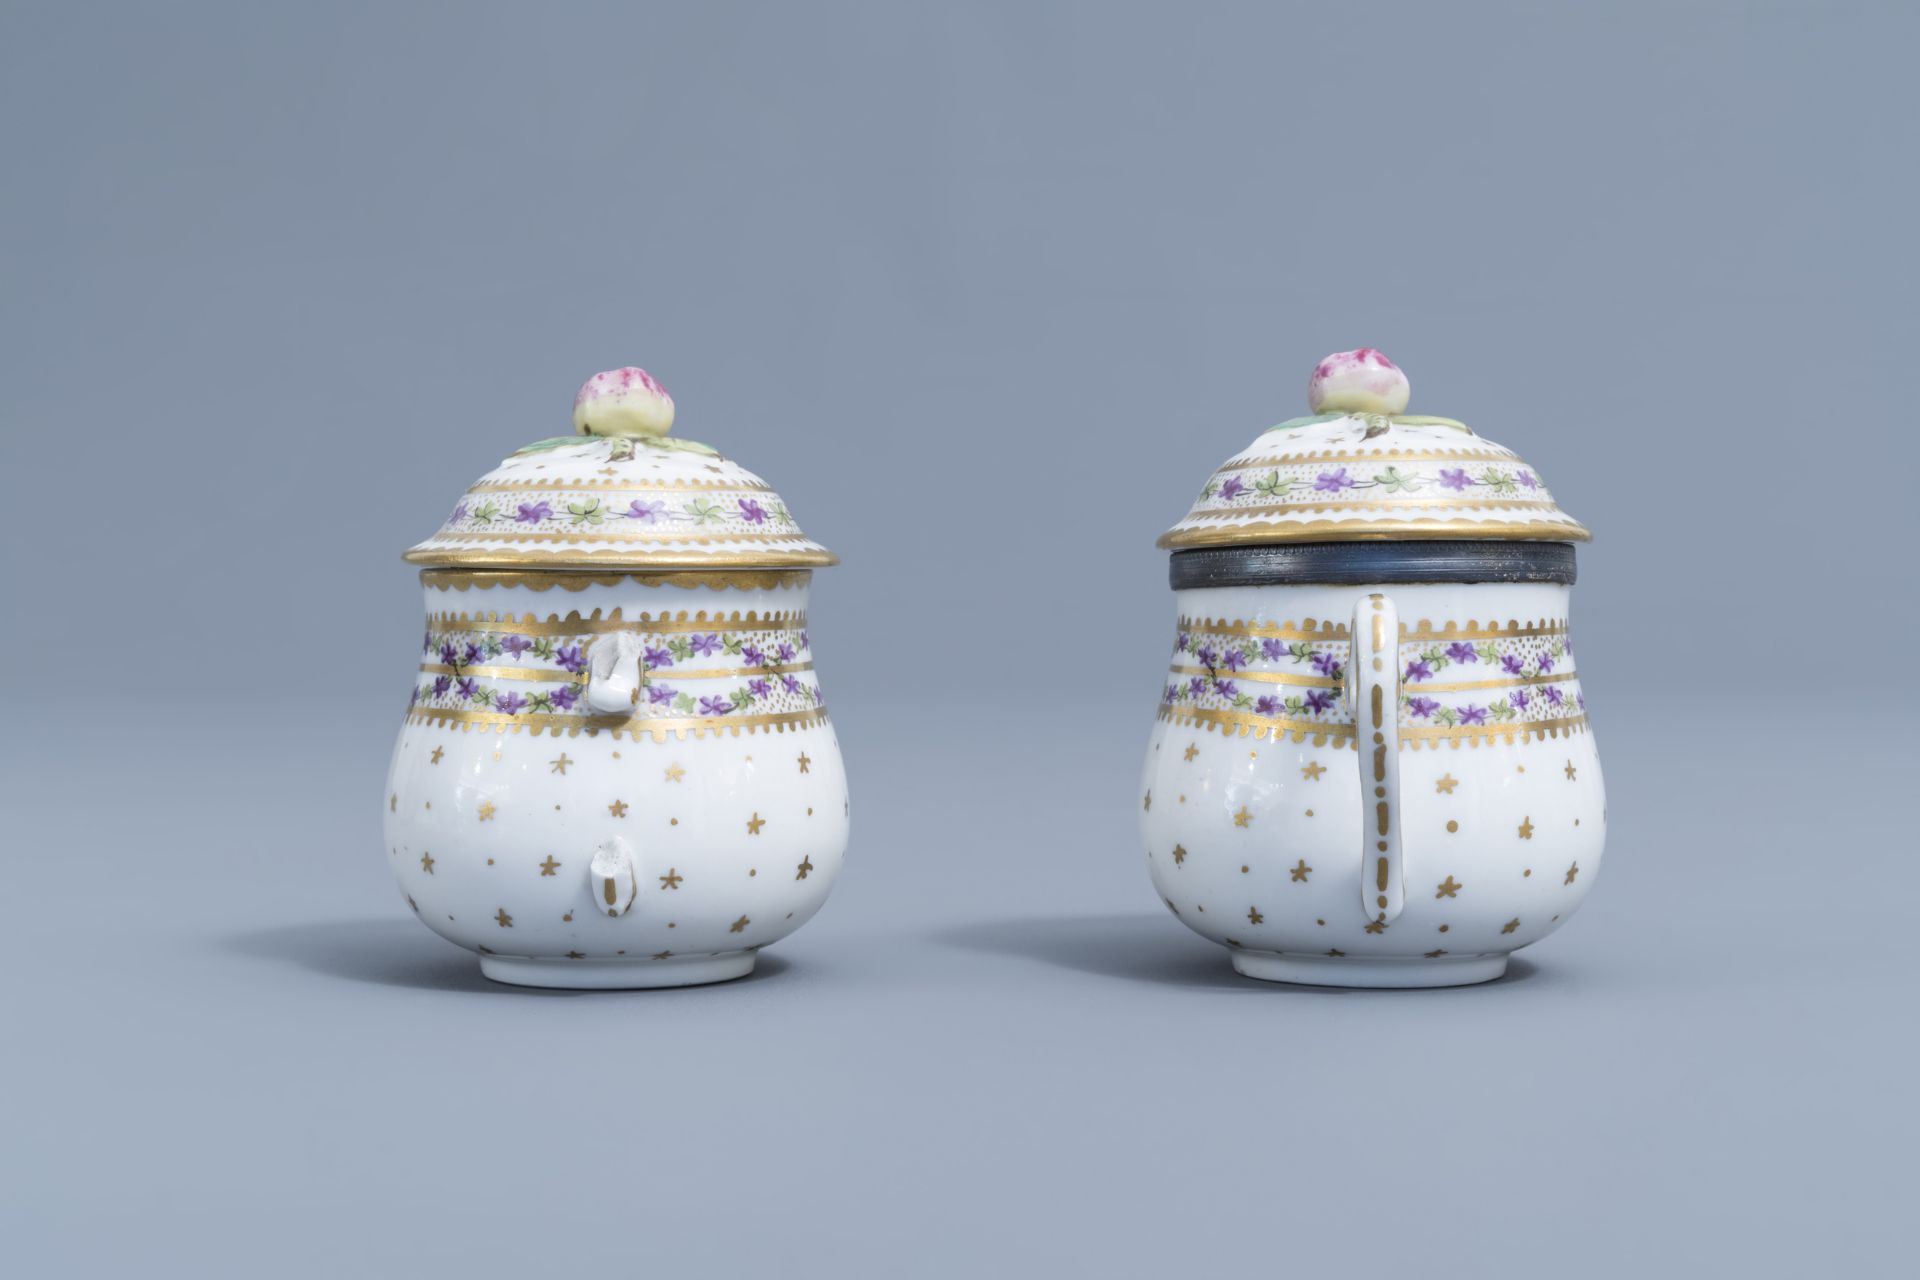 A pair of bue and white faience fine salts and five cream jars, Luxemburg and France, 18th/19th C. - Image 21 of 46